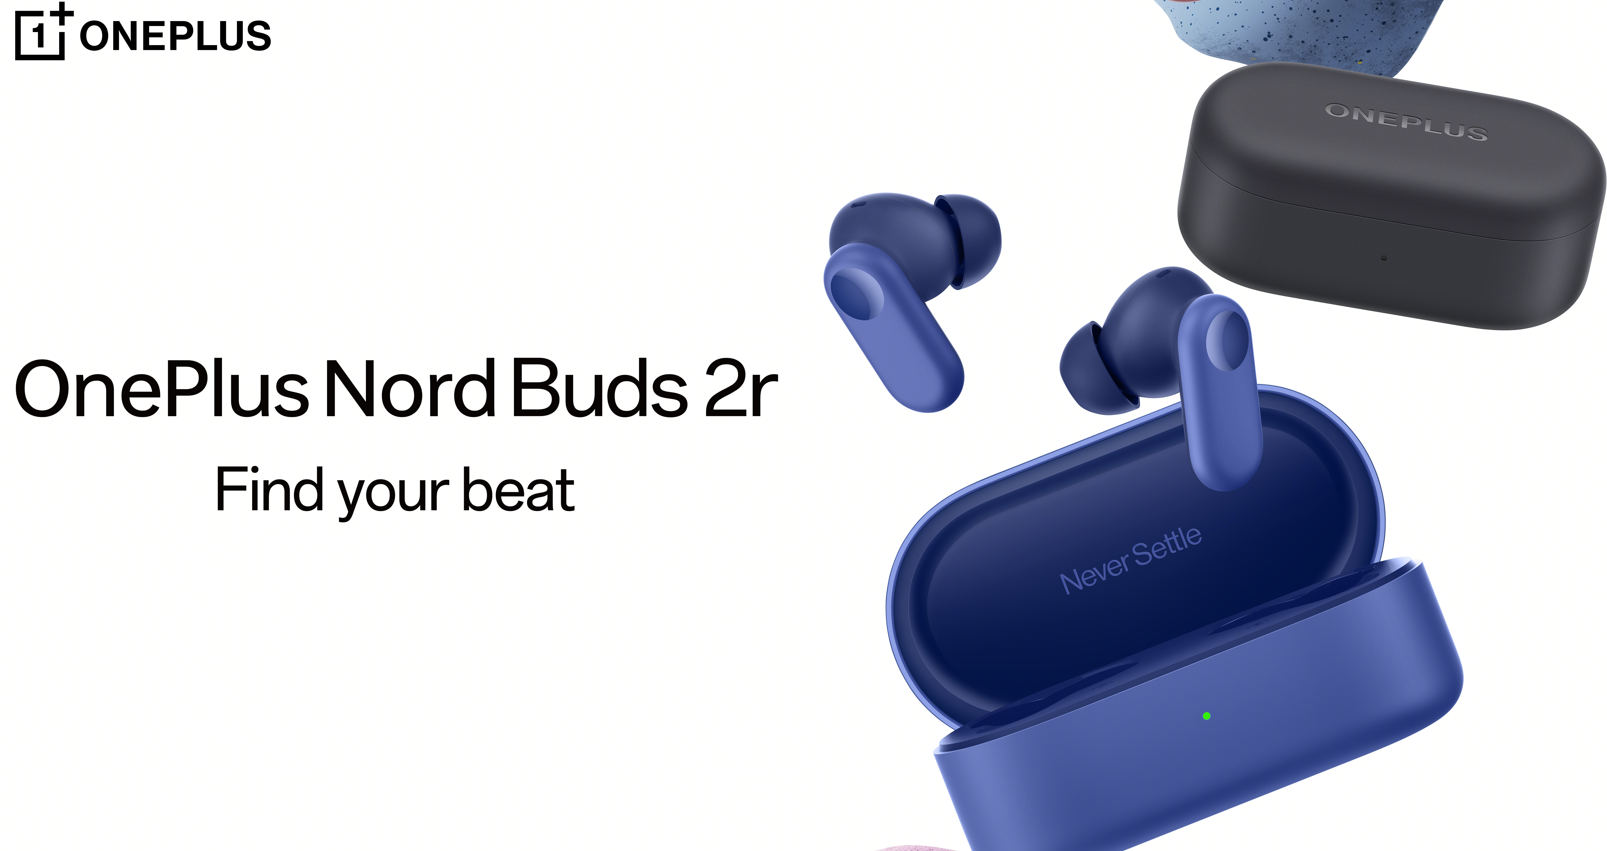 OnePlus Nord Buds 2r: a simplified version of the Nord Buds 2 without noise cancellation for $26